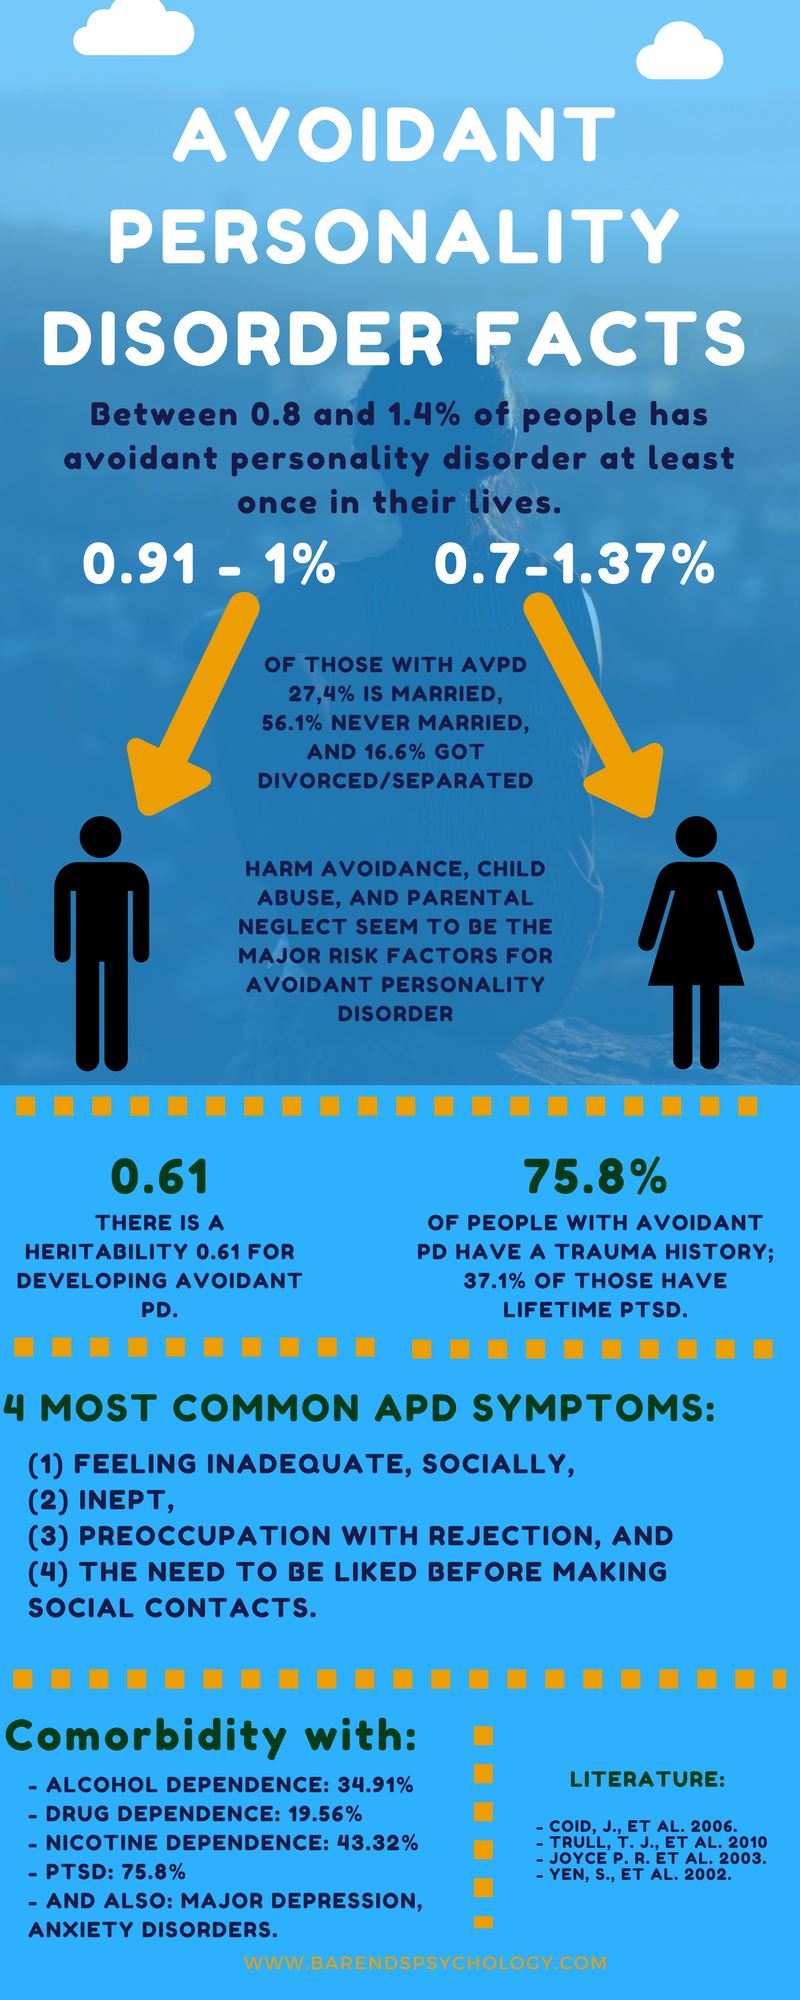 Personality what disorder avoidant is Avoidant Personality